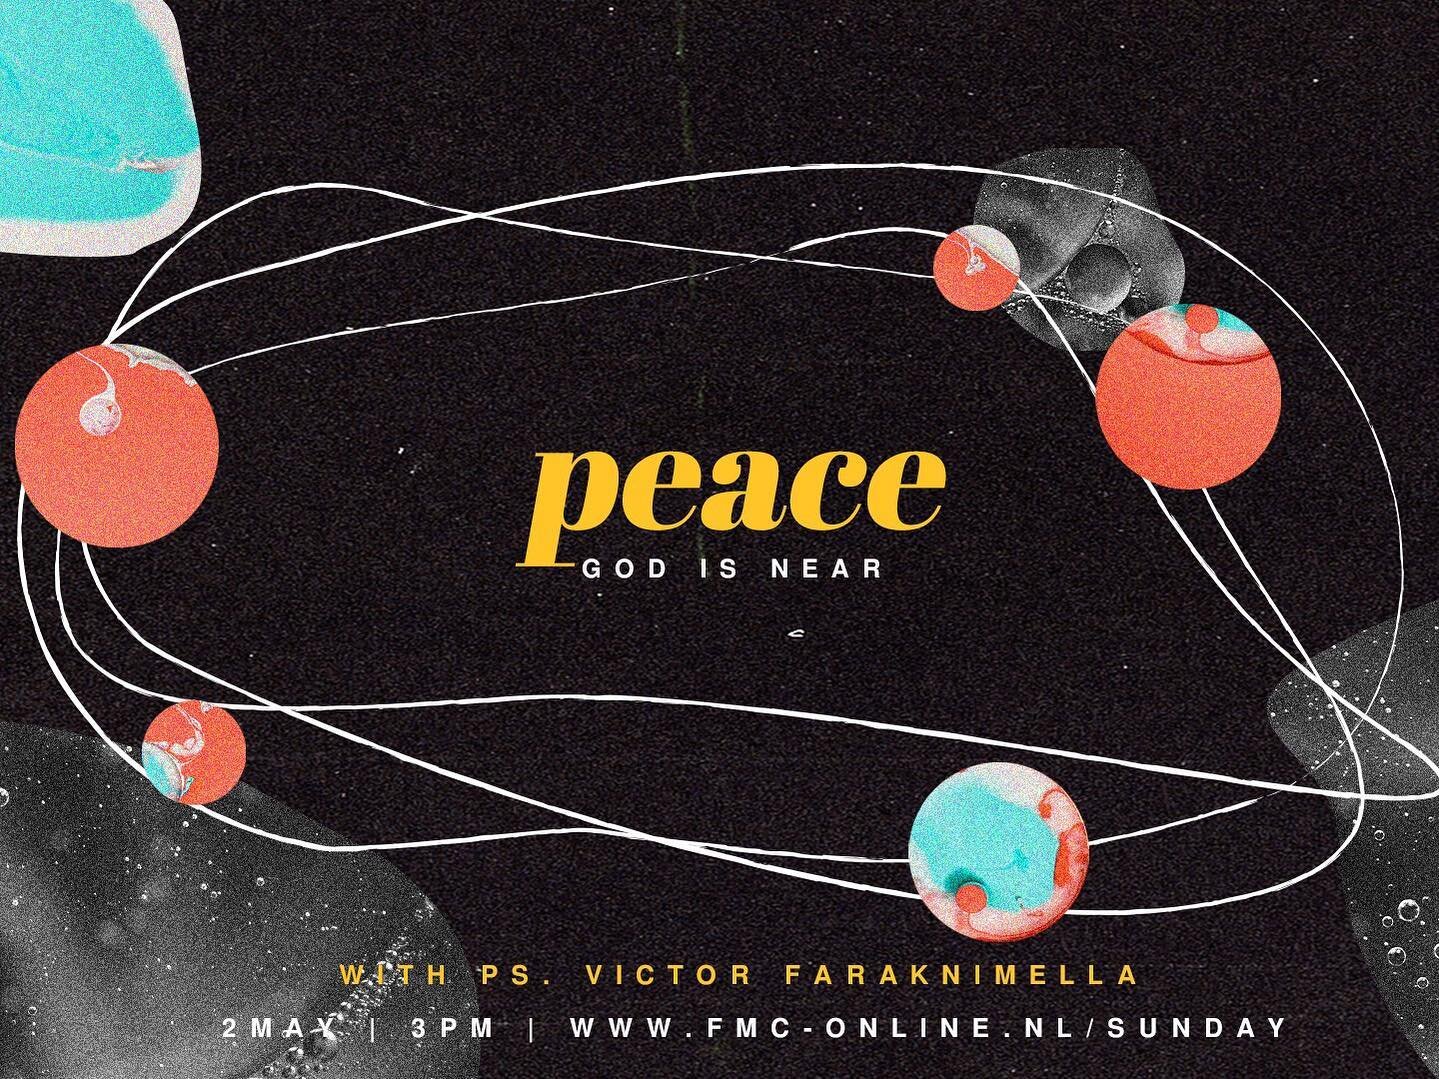 PEACE
New month, new theme 🔥 Join us at 3PM for Holy Communion and a refreshing and encouraging message from God🙌🏼

Invite your friends and family! See you online.

Link in bio